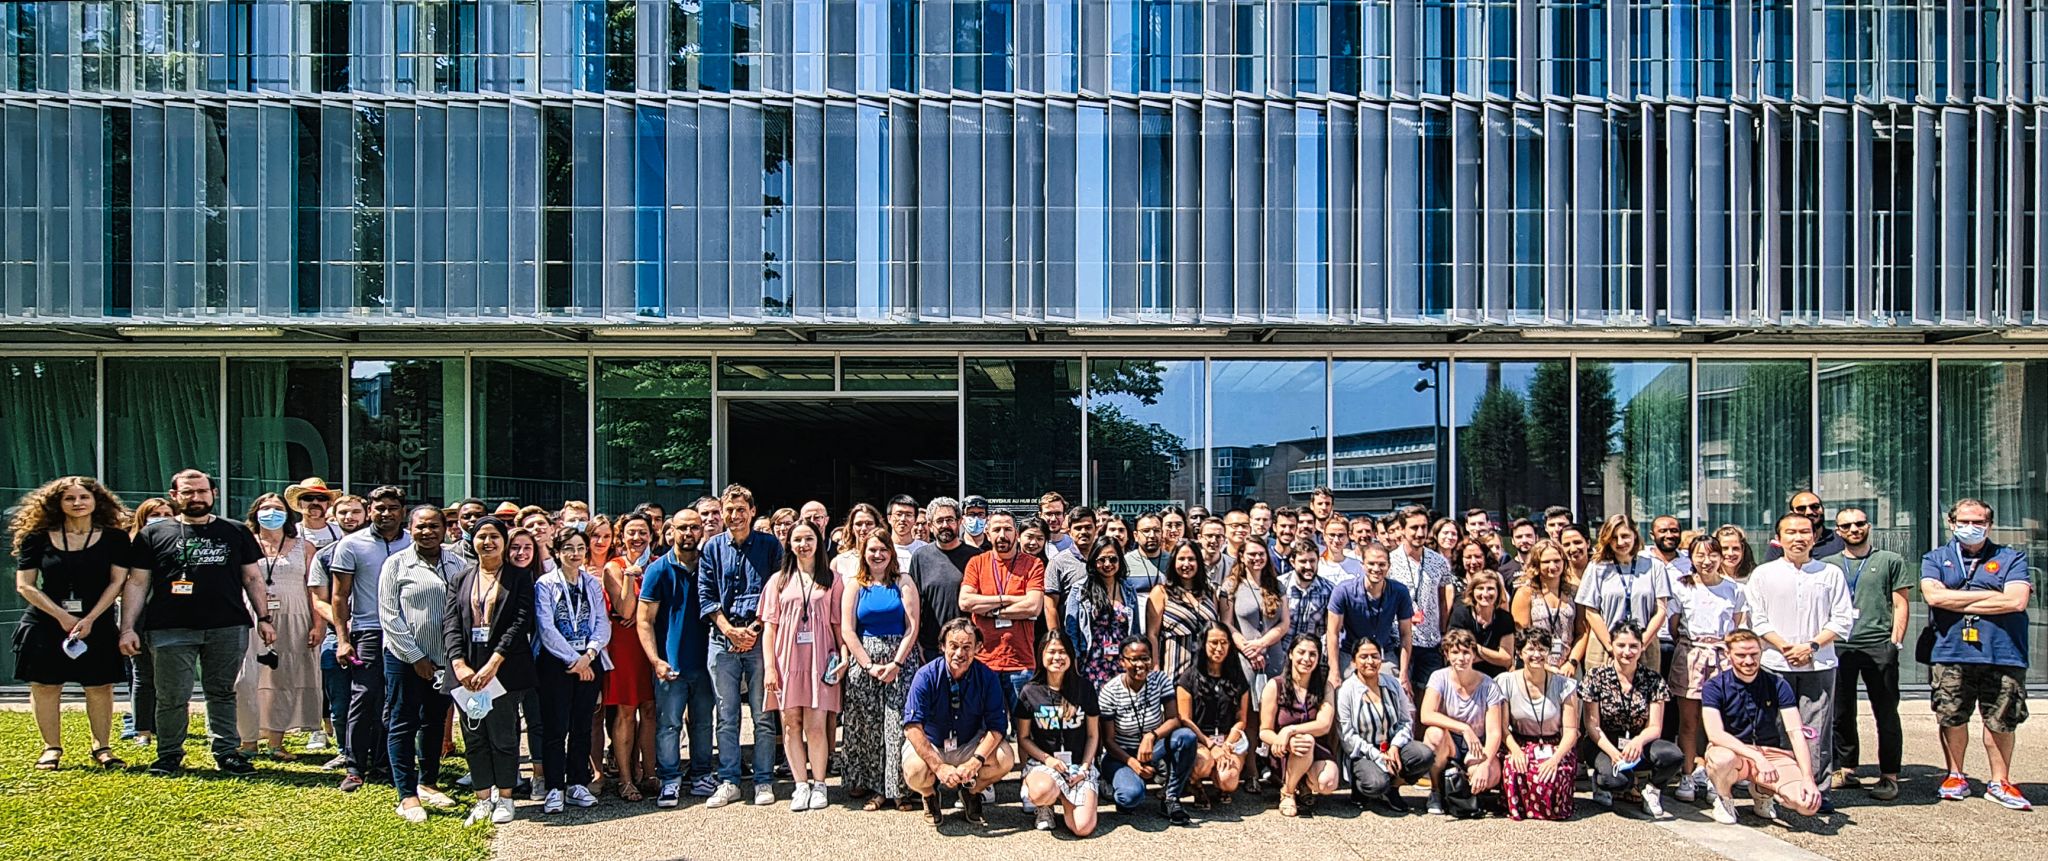 Ivone (front row, middle, ‘star-wars shirt) with all the LRCS members after Scientific Day, Amiens, France, July 2021.